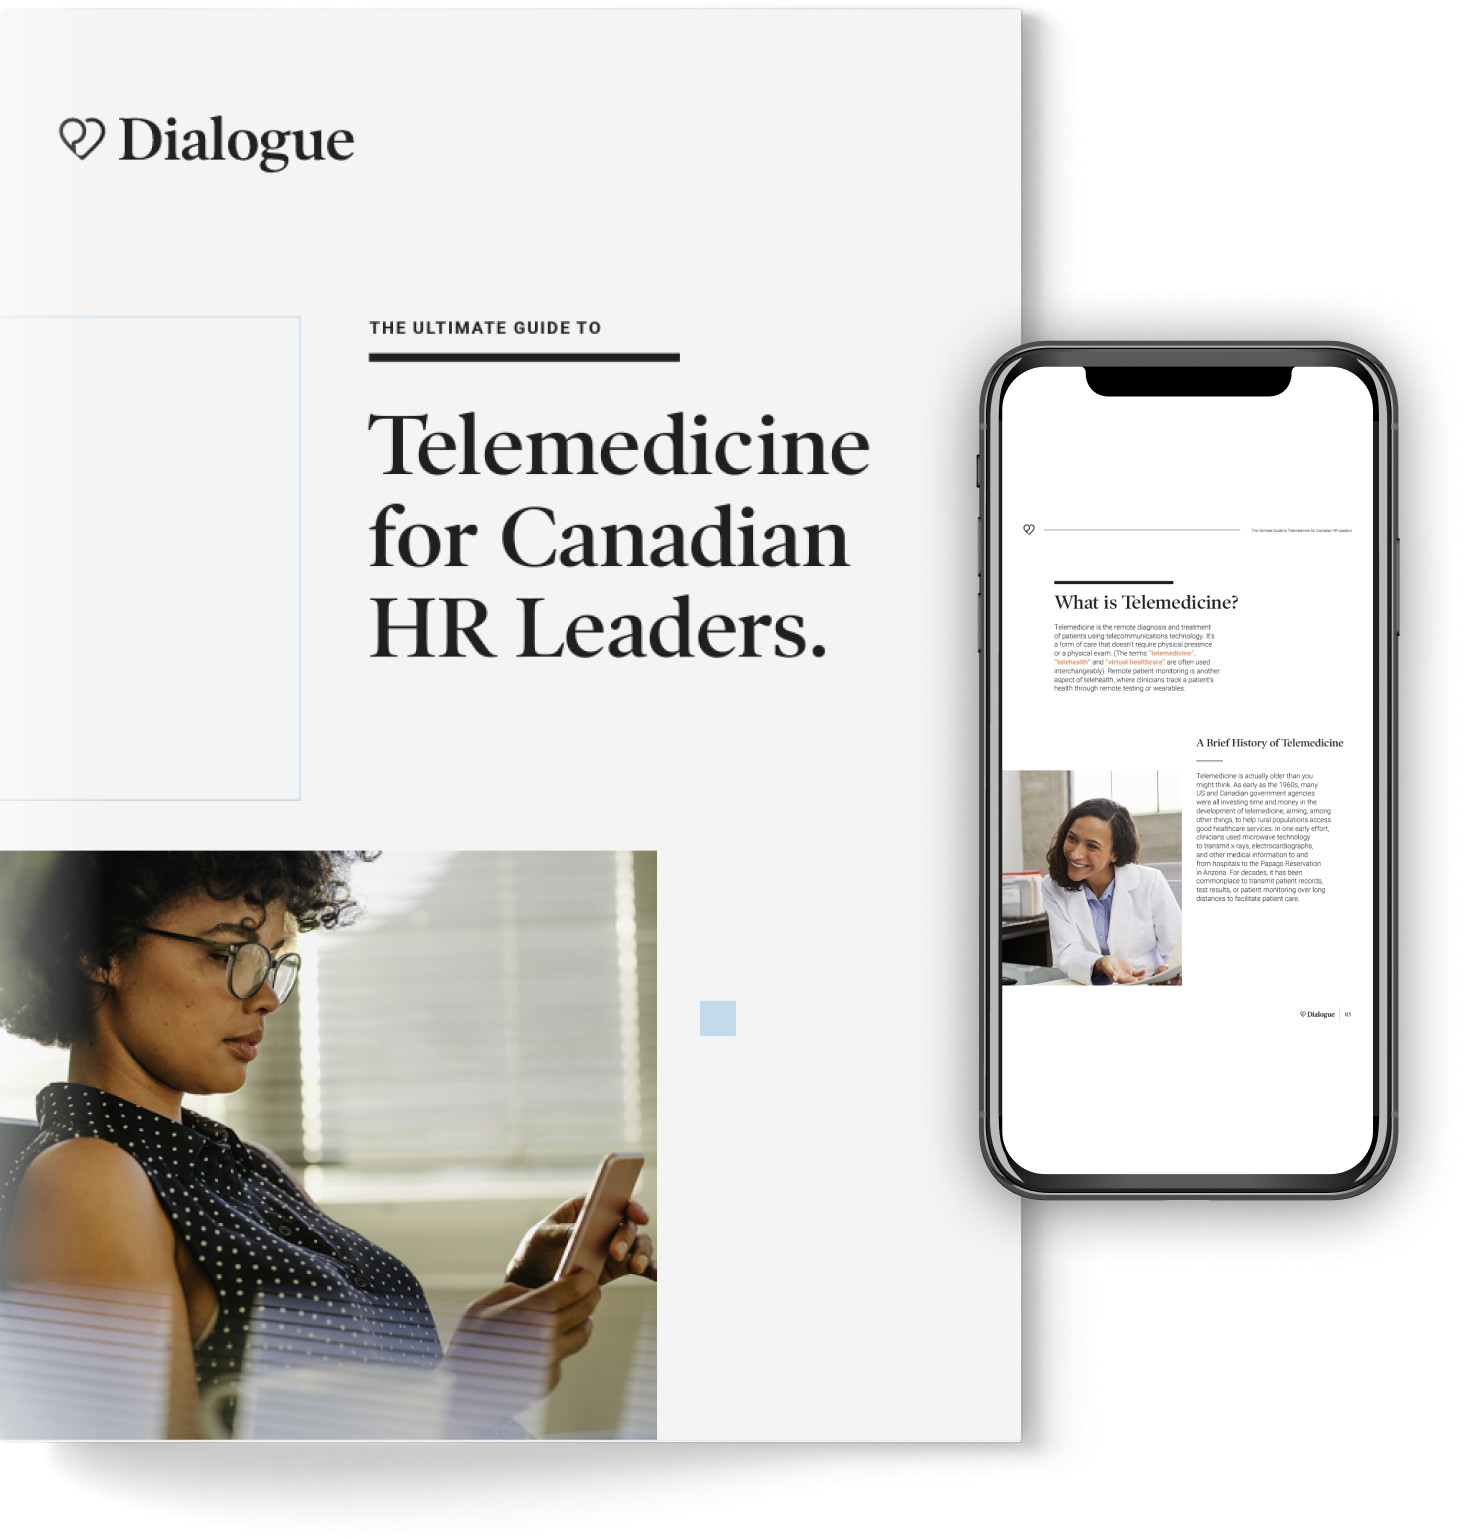 Download The ultimate guide to telemedicine for HR leaders | Dialogue